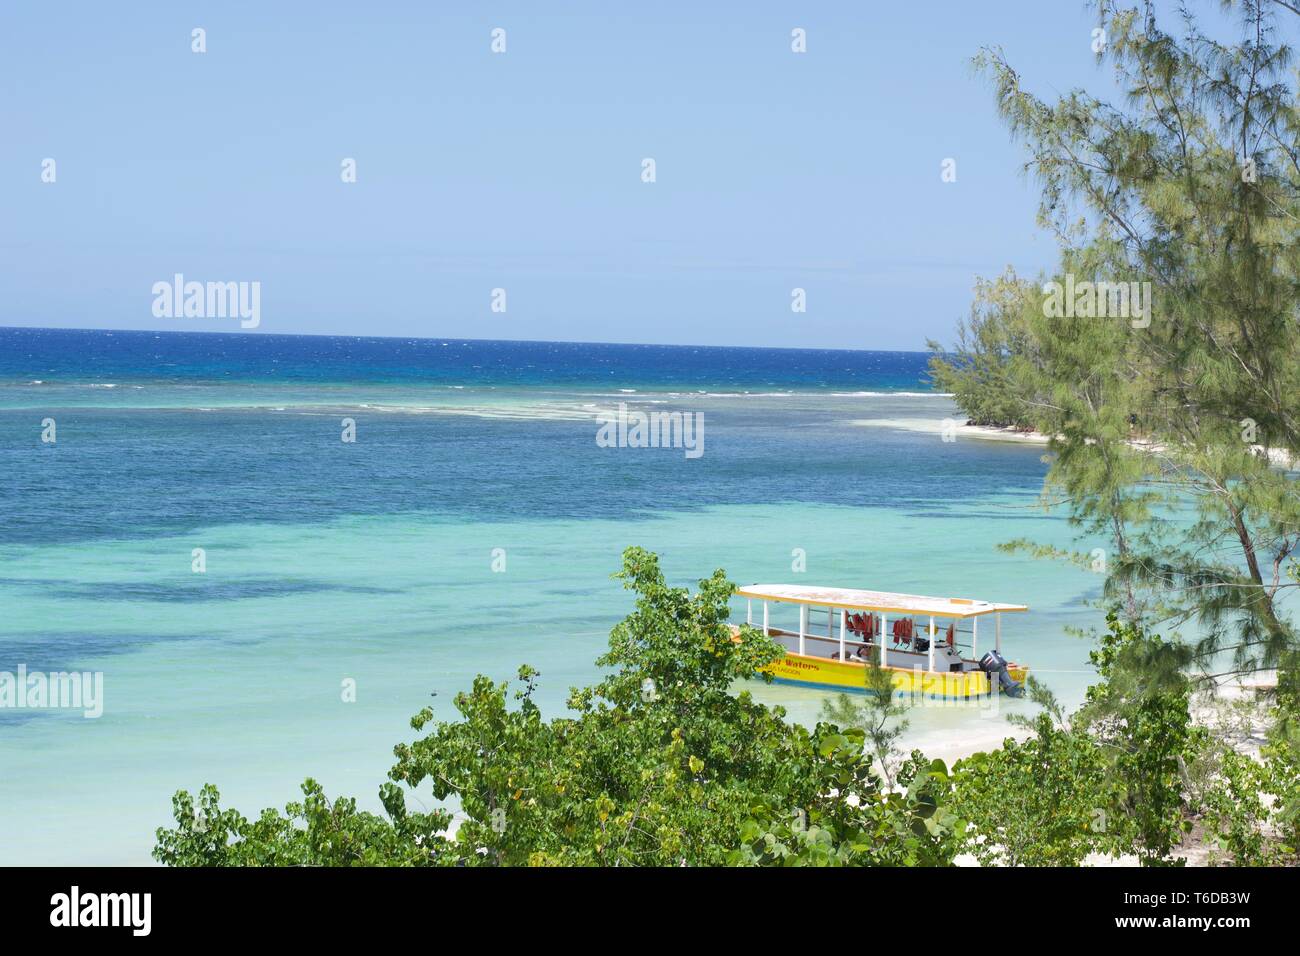 boat by the beach, Montego Bay, Jamaica Stock Photo